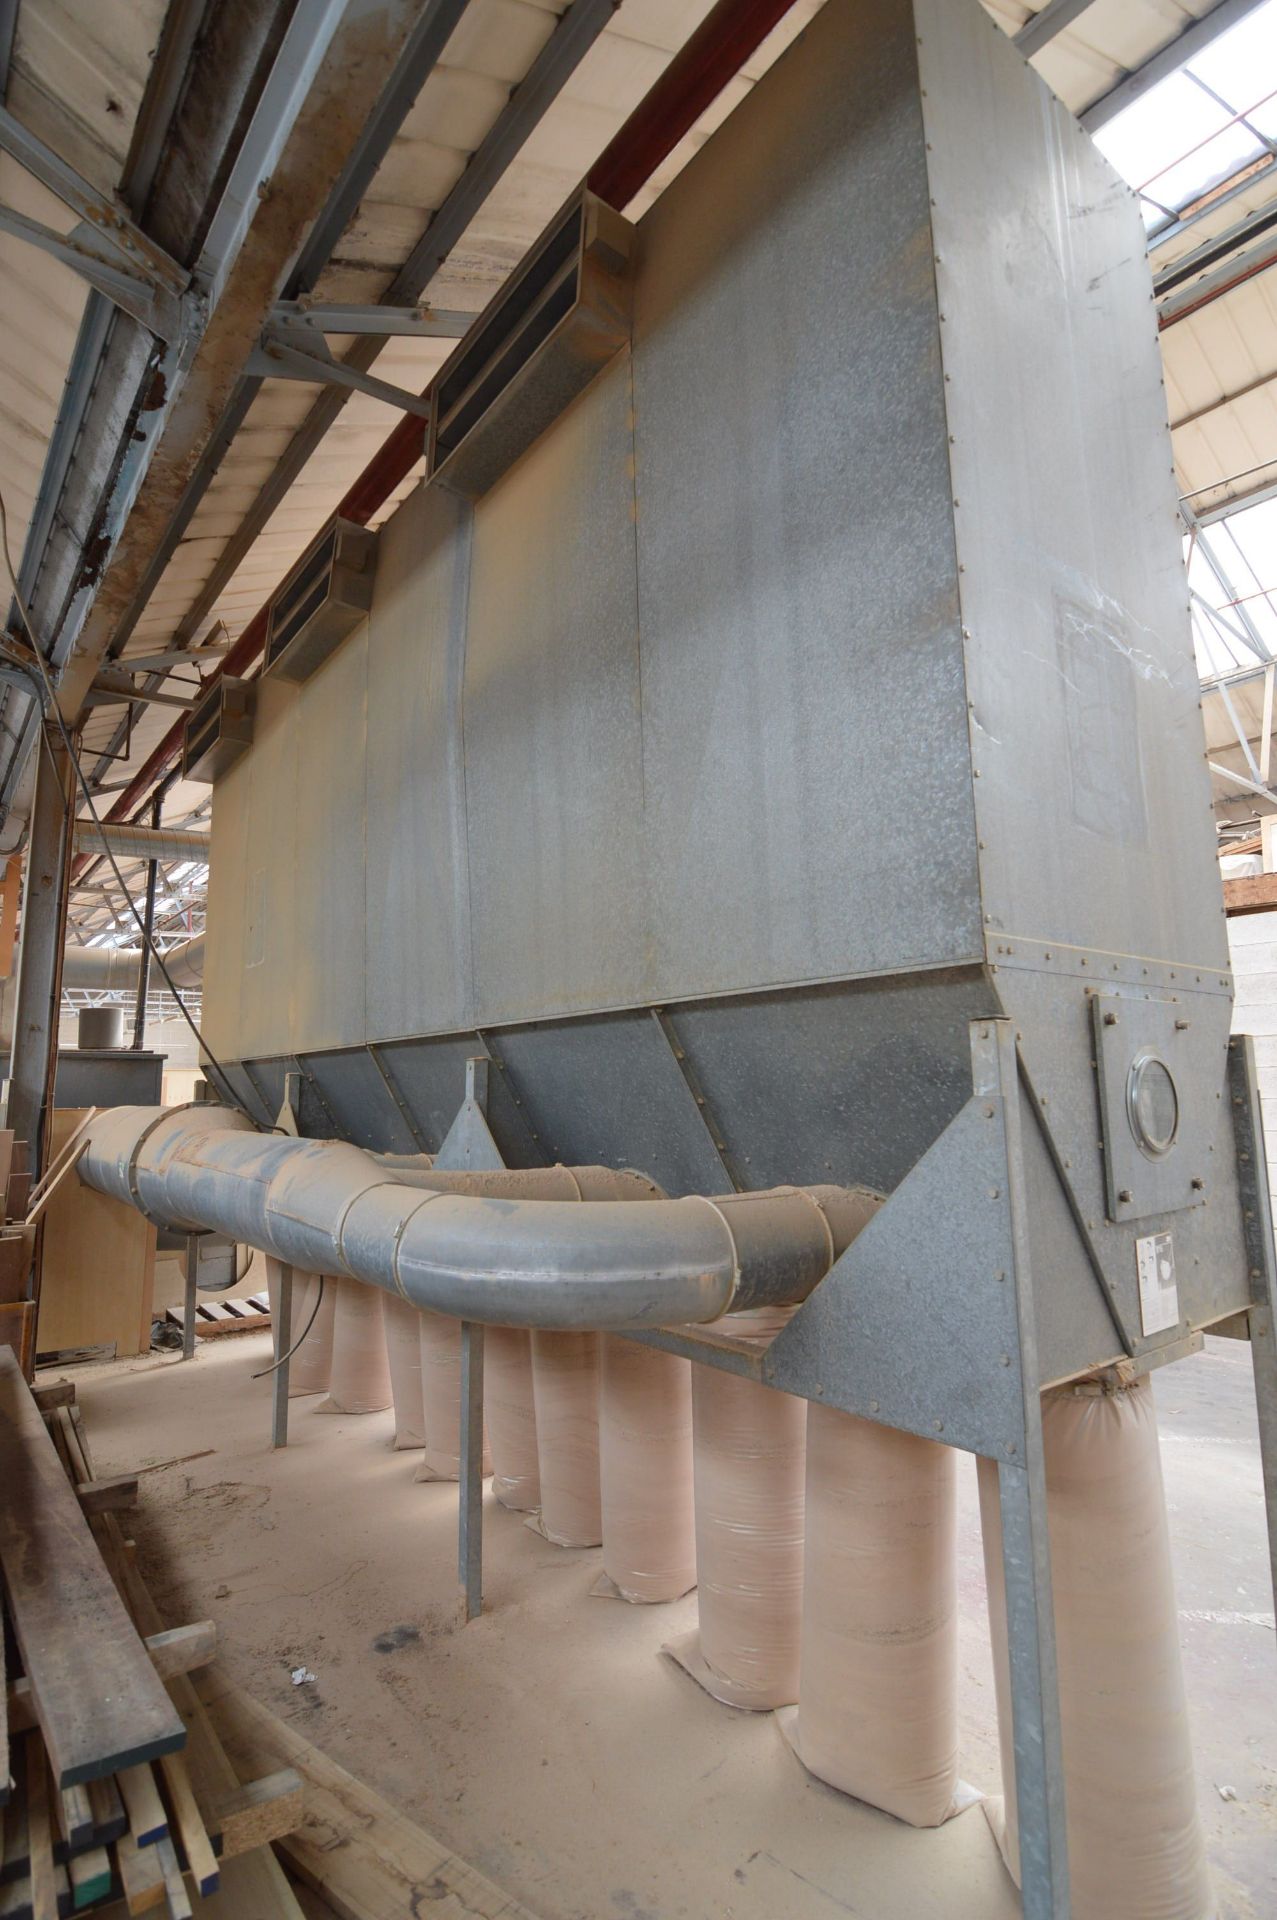 GALVANISED STEEL CASED 12-BAG DUST COLLECTION UNIT, with centrifugal fan and ducting to first bolted - Image 2 of 2